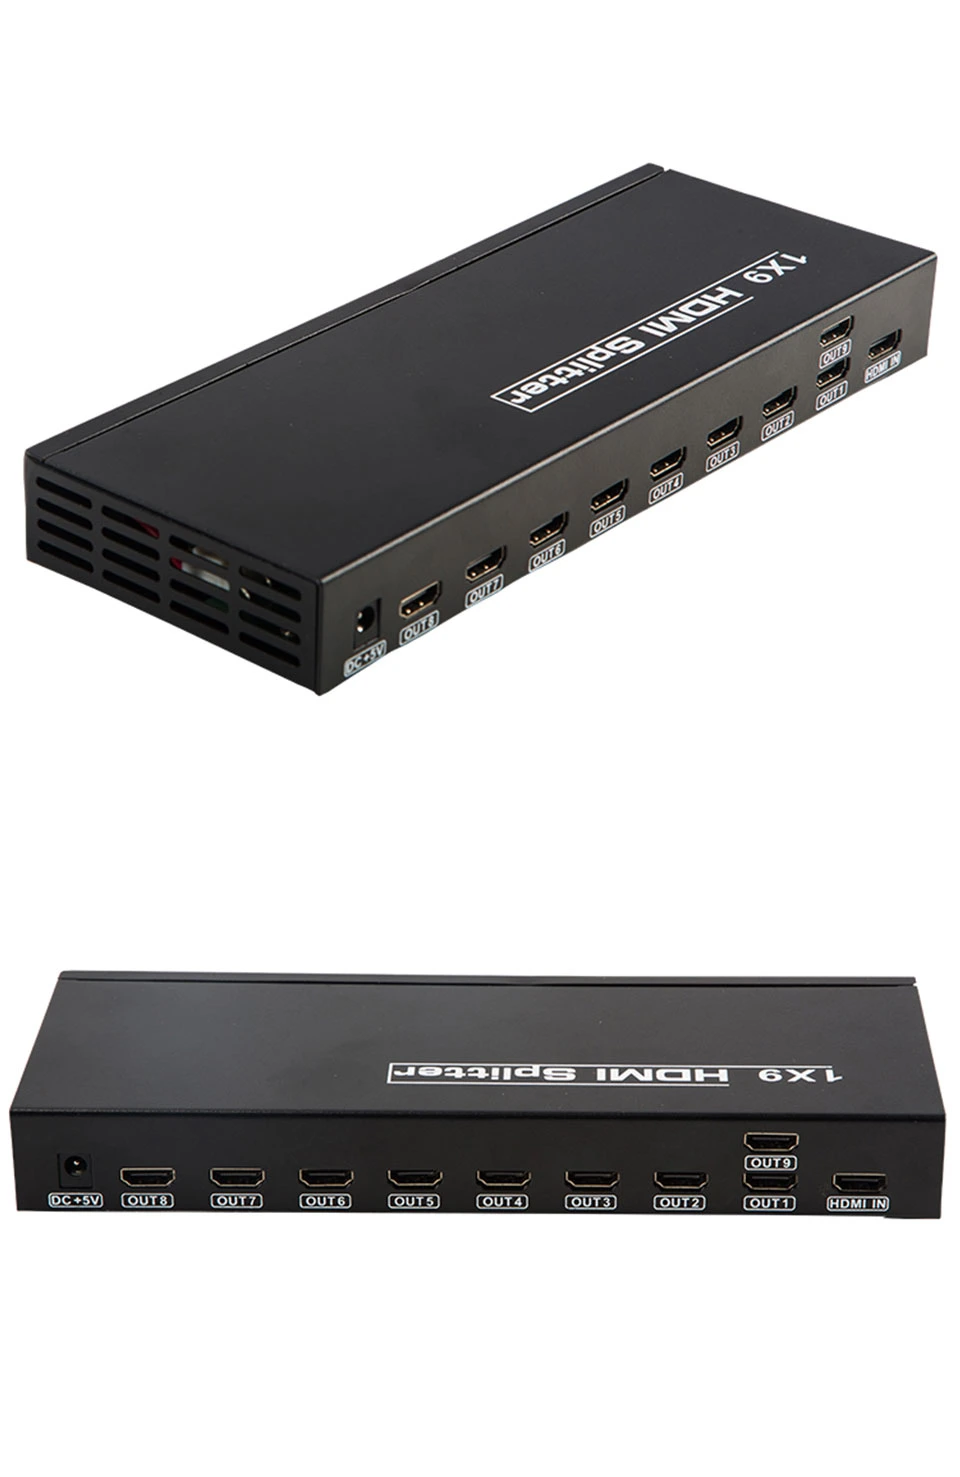 4K HDMI Splitter 1X9 HDMI 1 Input 9 Output for Video Wall